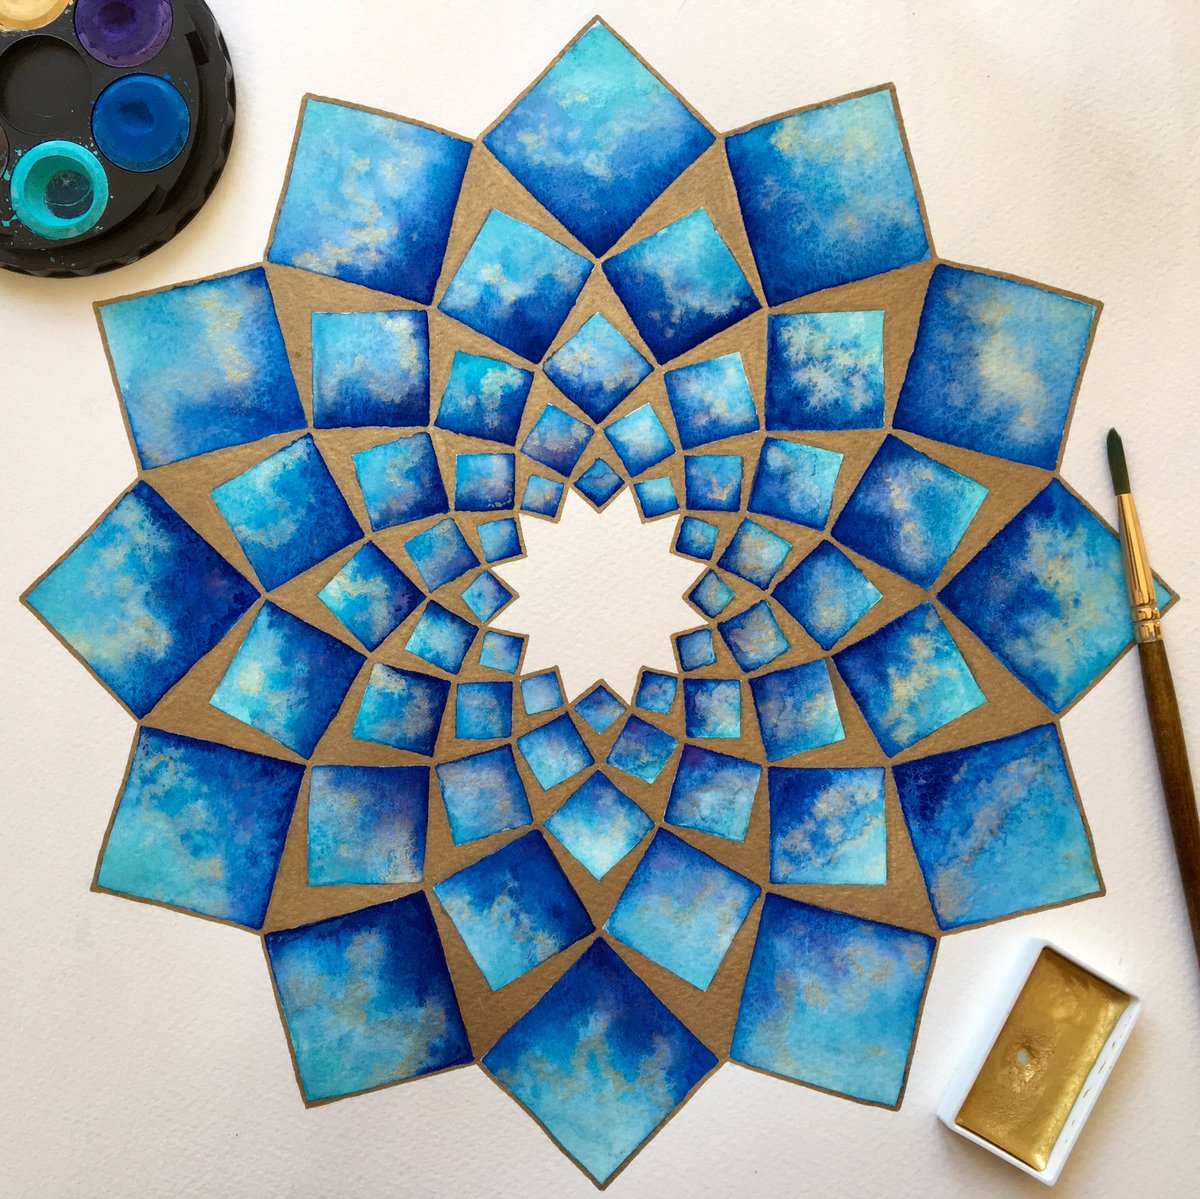 I knew I wanted to construct the almond-shaped version of the diminishing squares mandala that I’ve painted before (below).